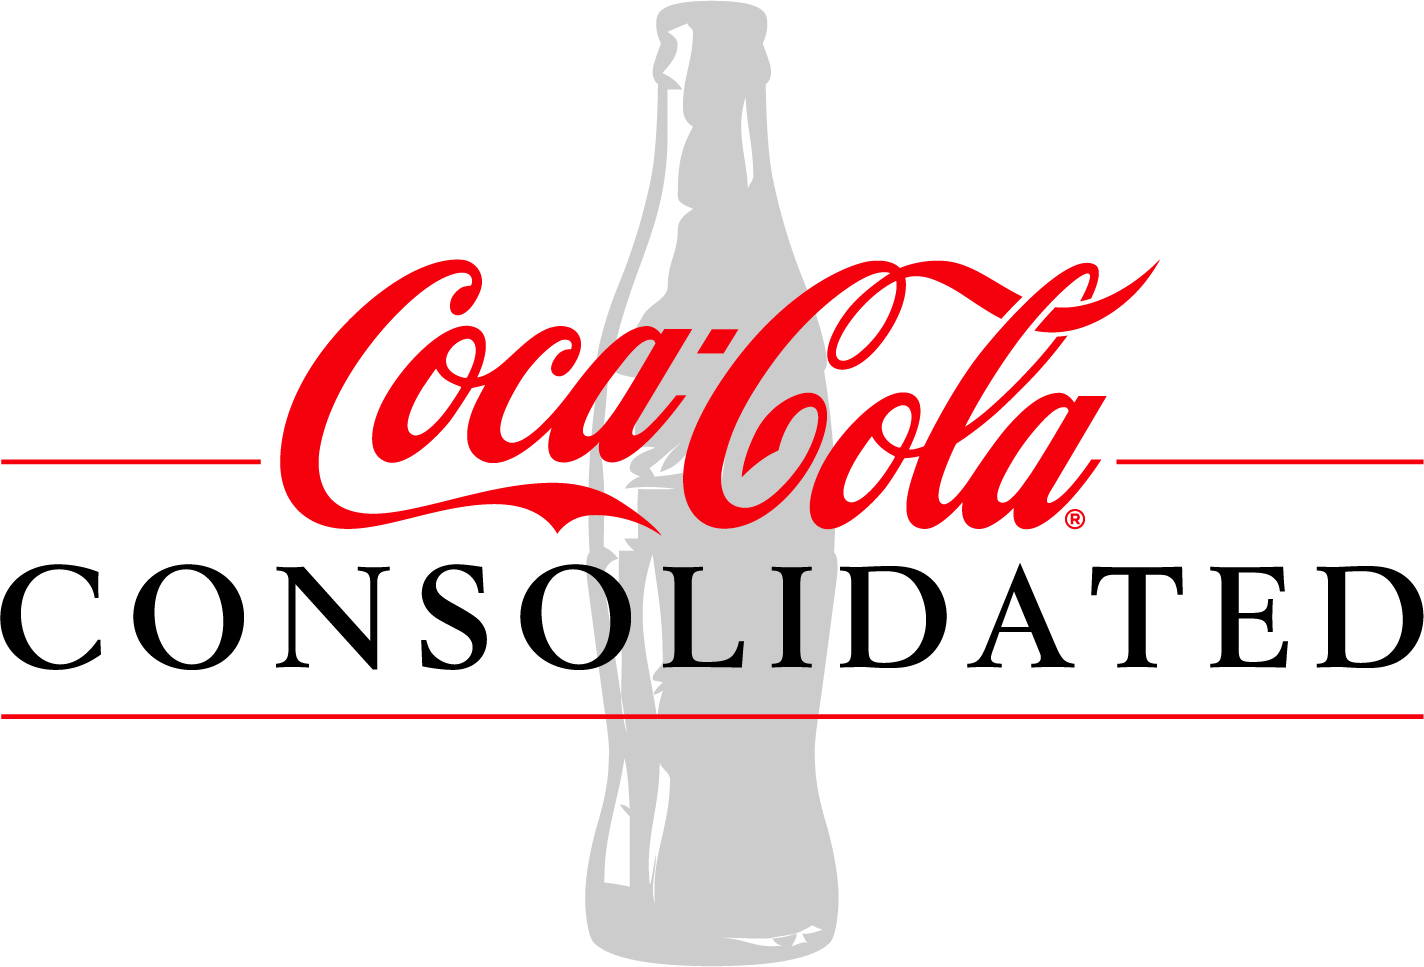 Coke Consolidated Logo Color (Primary)